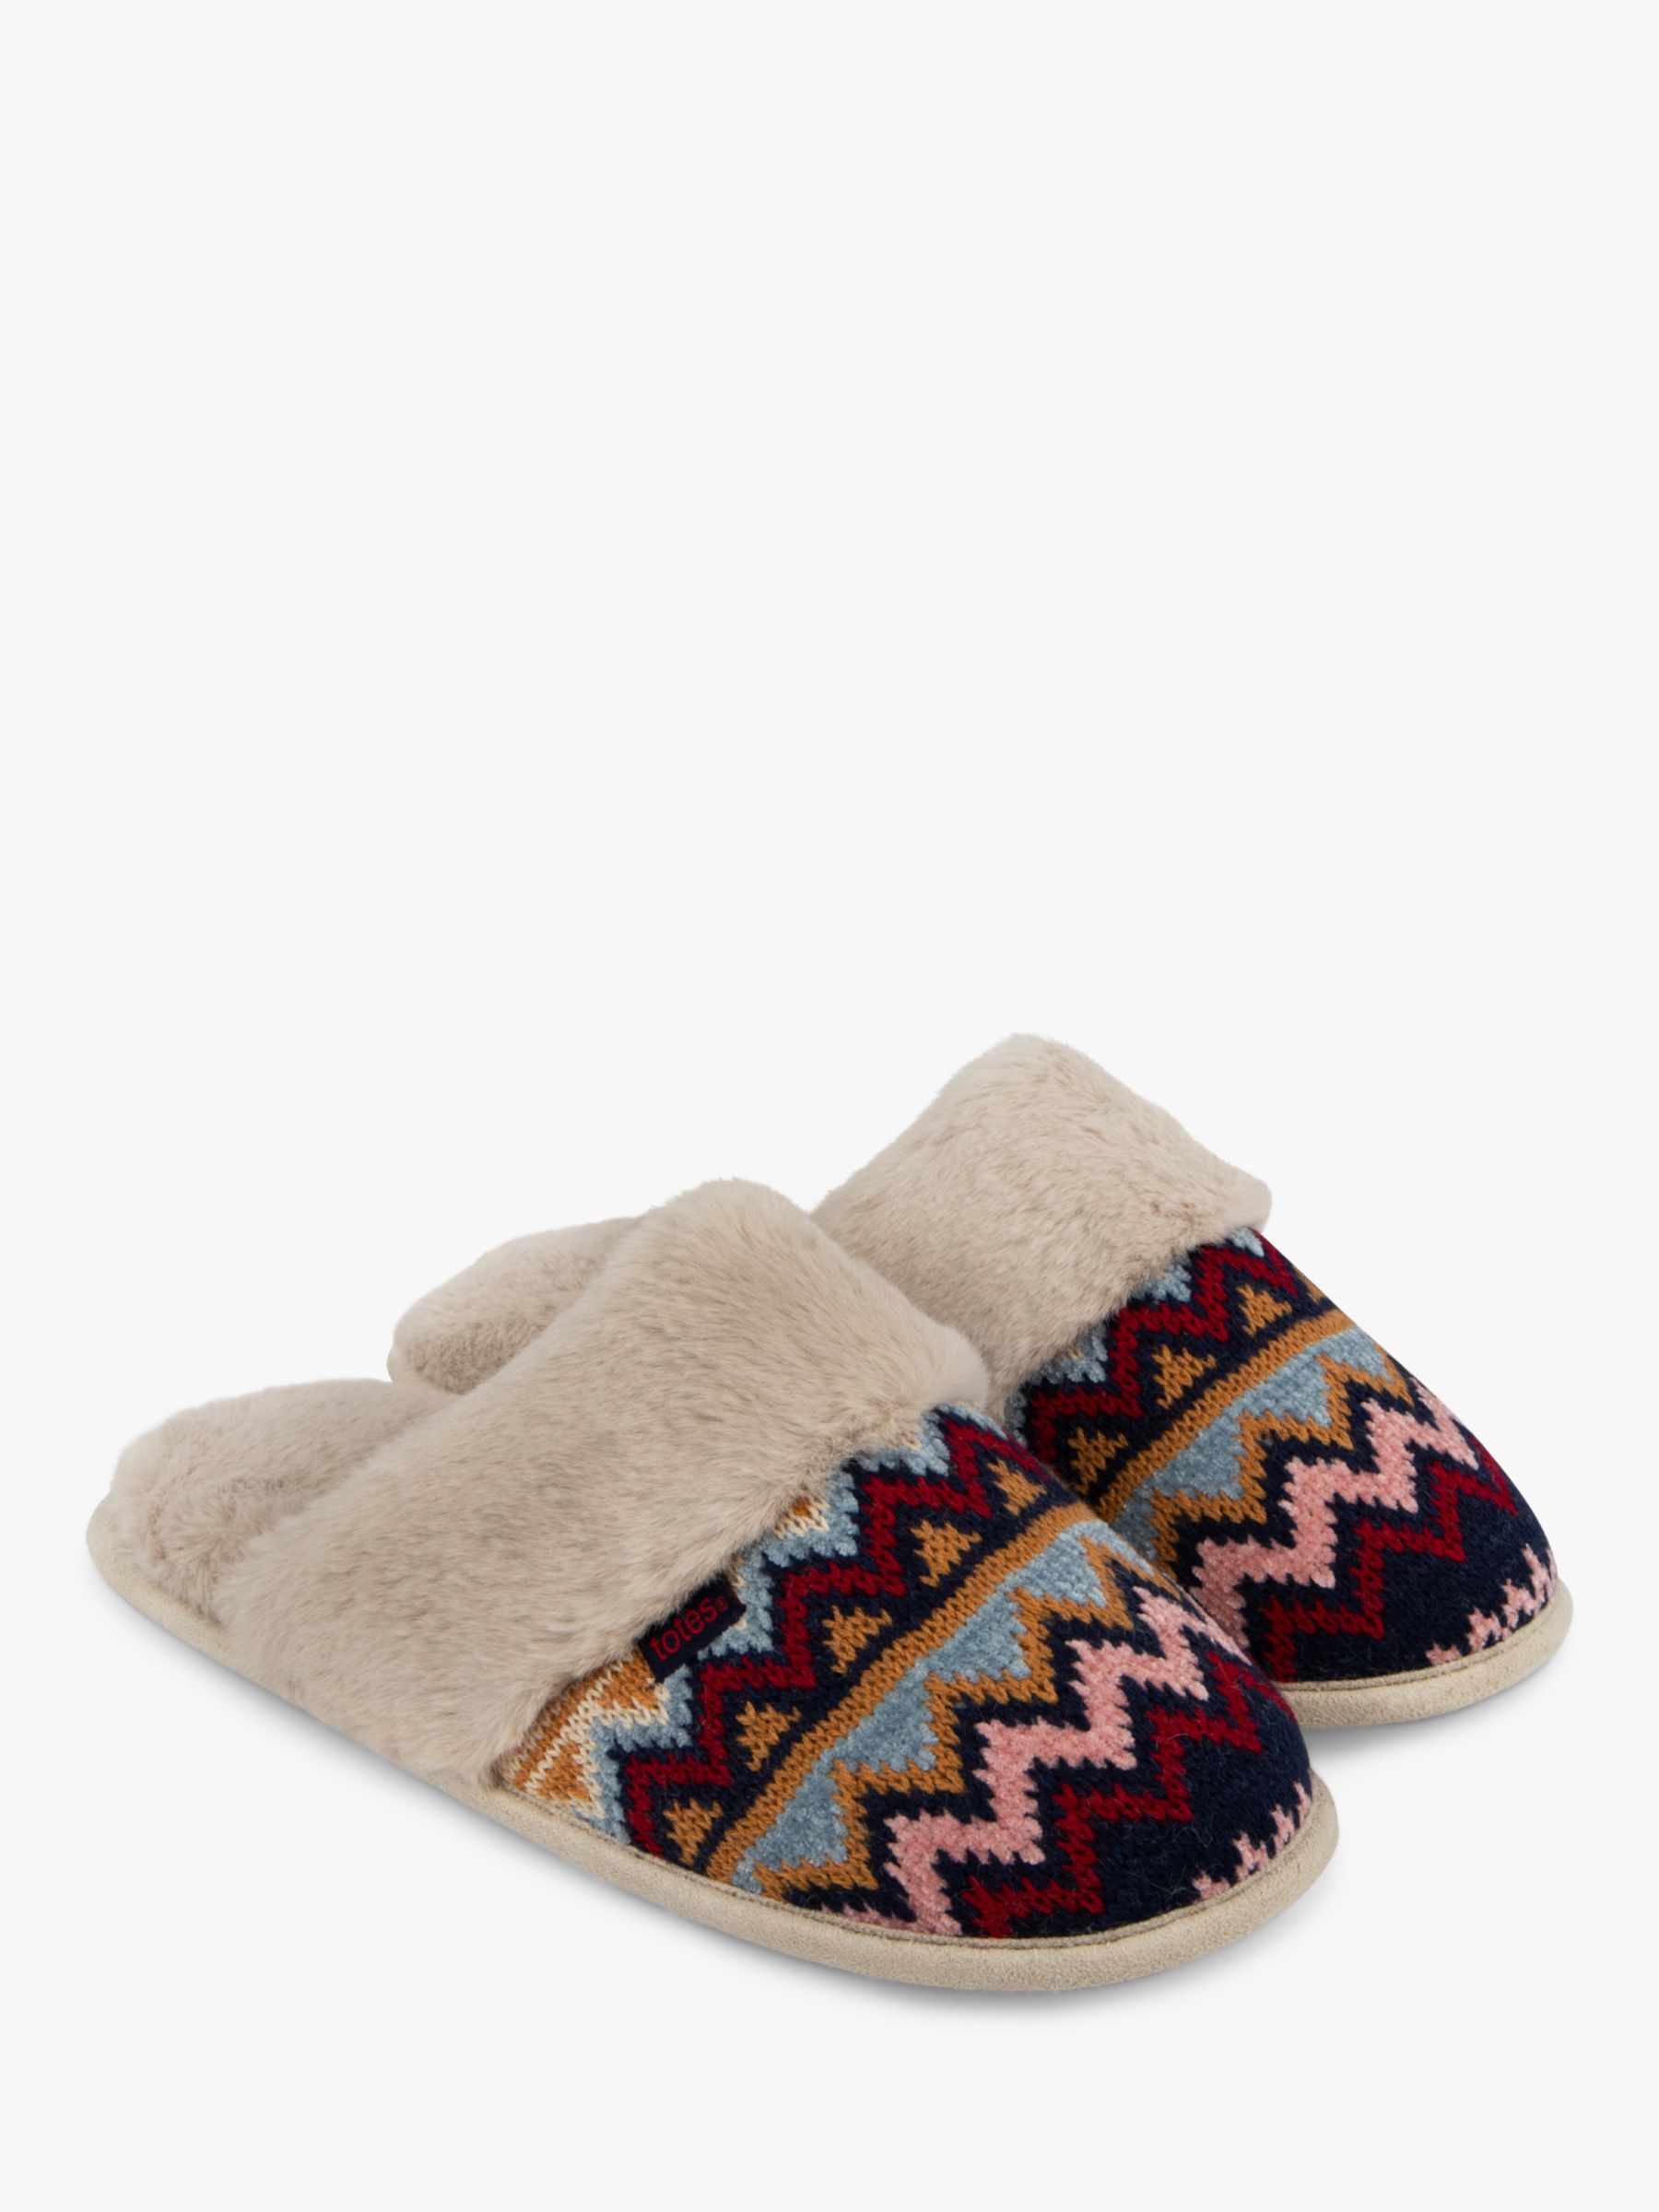 Totes Knitted Fair Isle Slippers